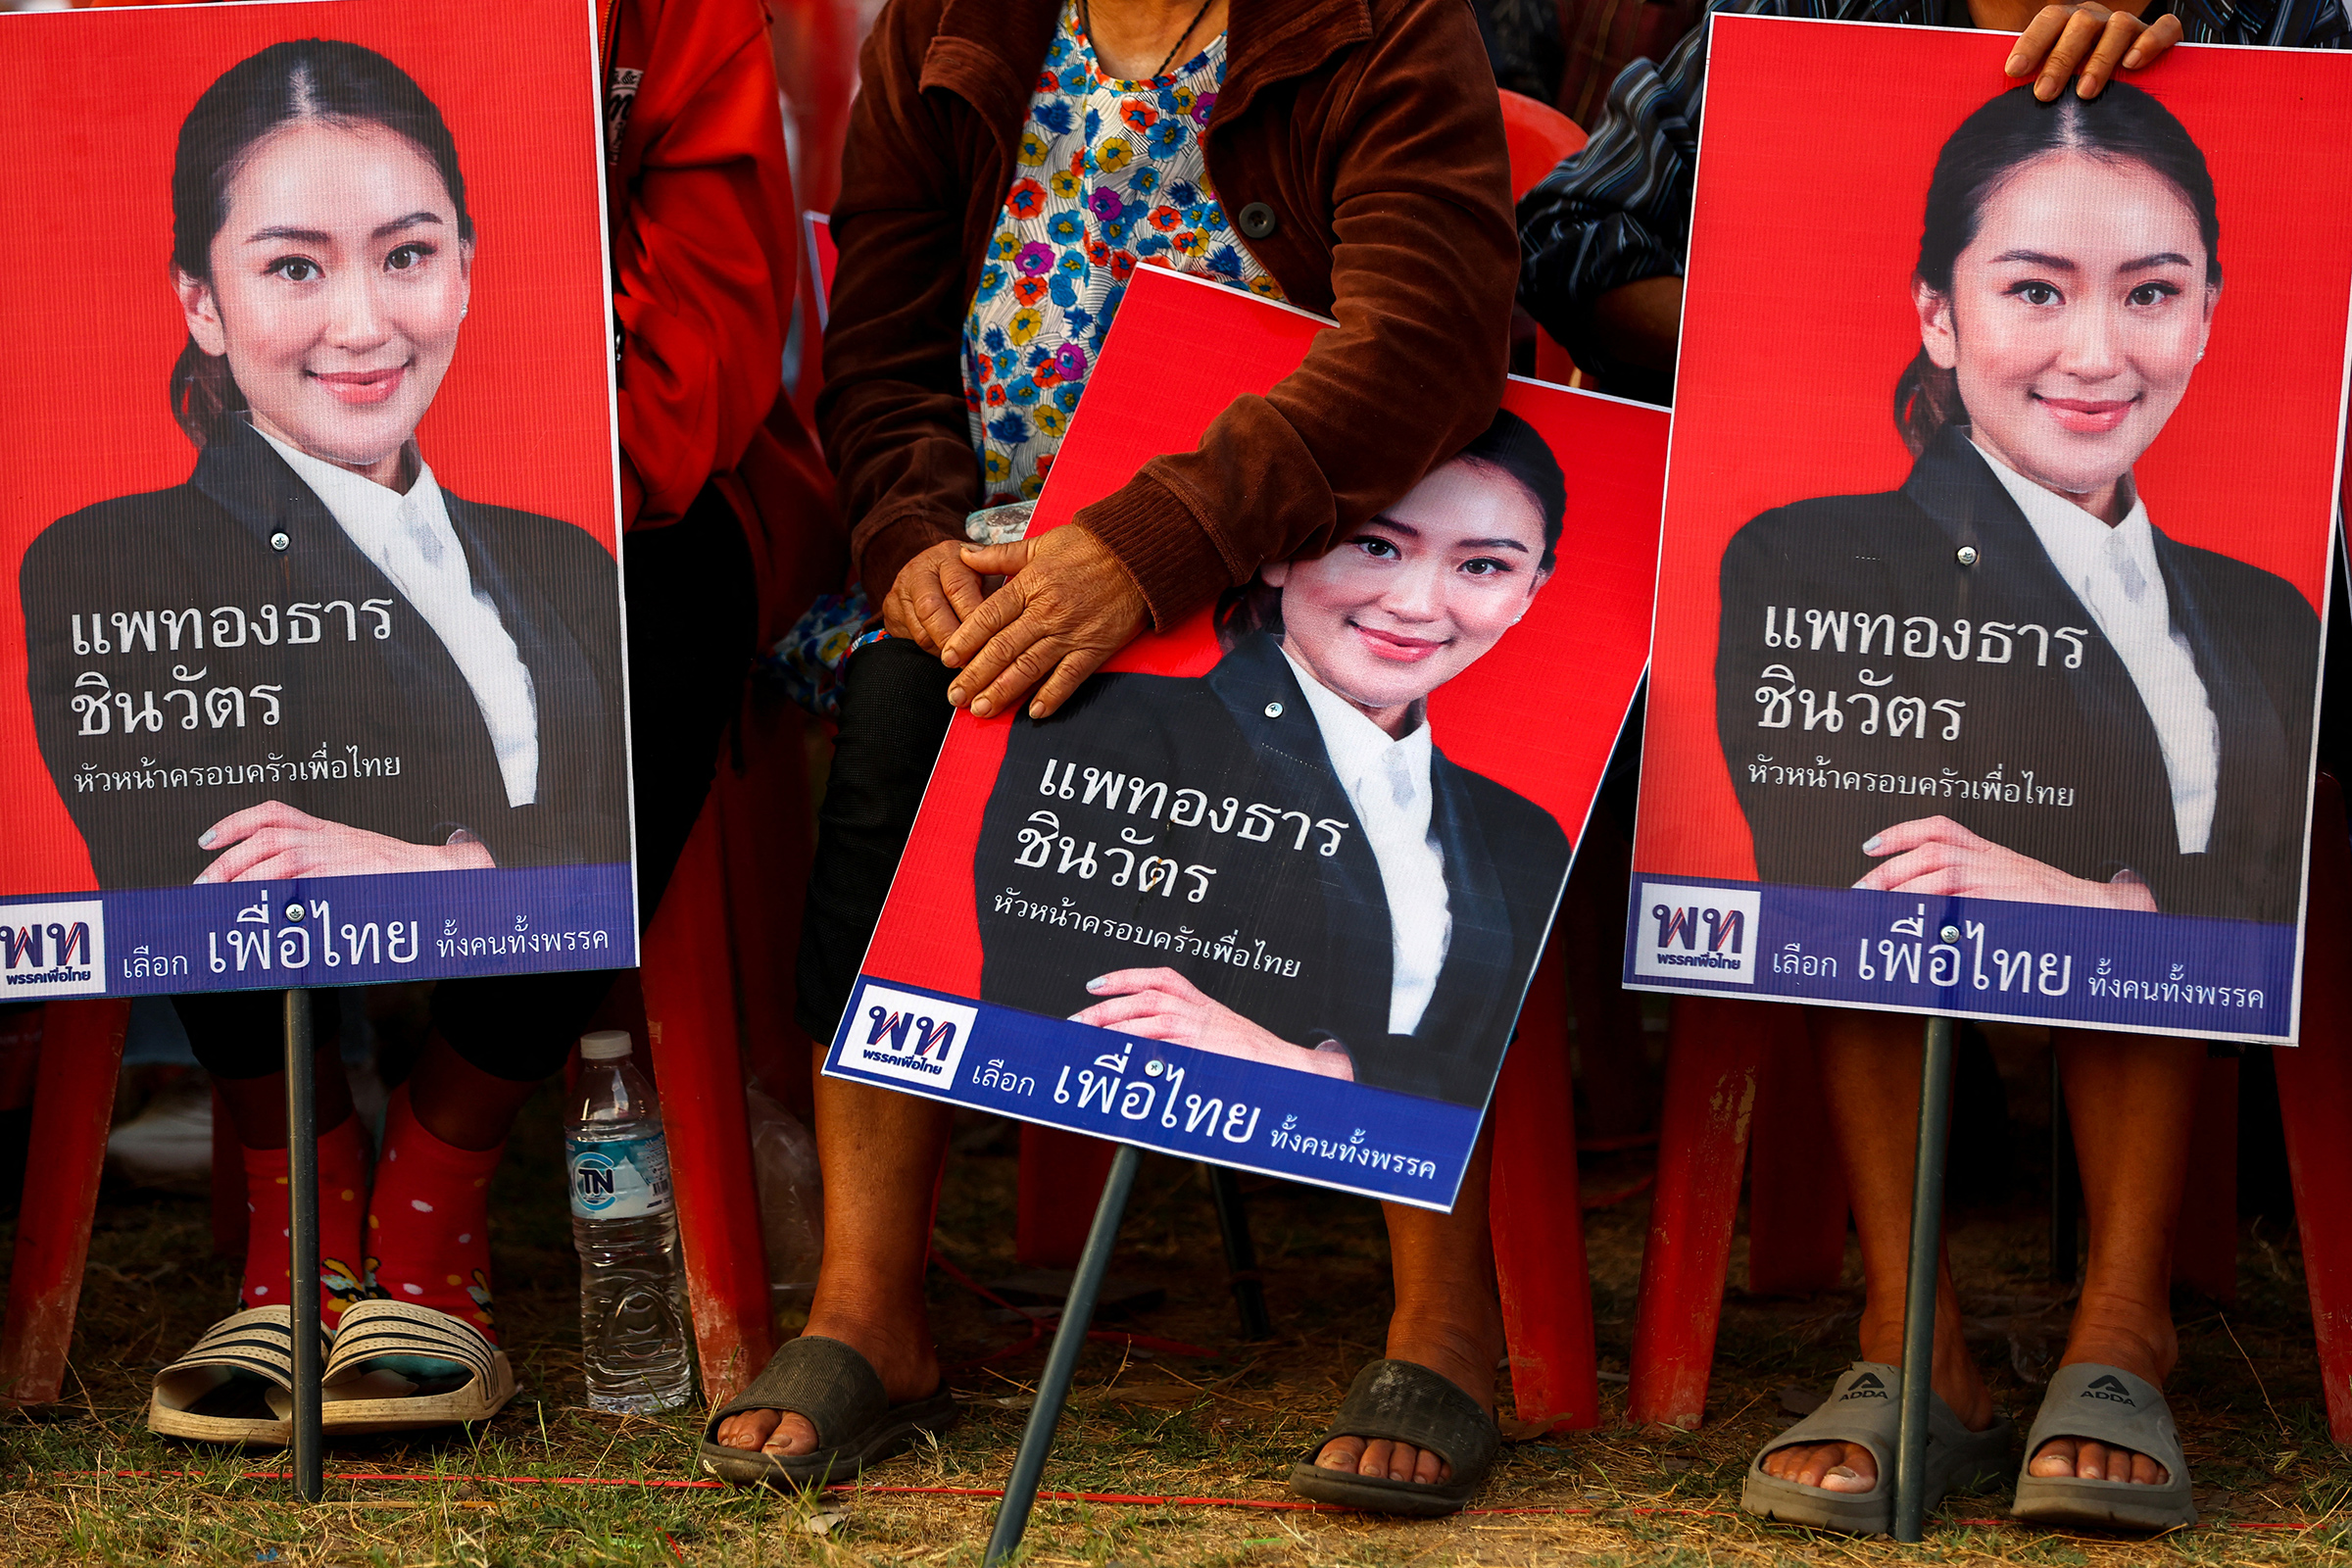 Supporters hold posters of Paetongtarn Shinawatra during the general election campaign in Ubon Ratchathani province, Thailand, on Feb. 17. (Athit Perawongmetha—Reuters)